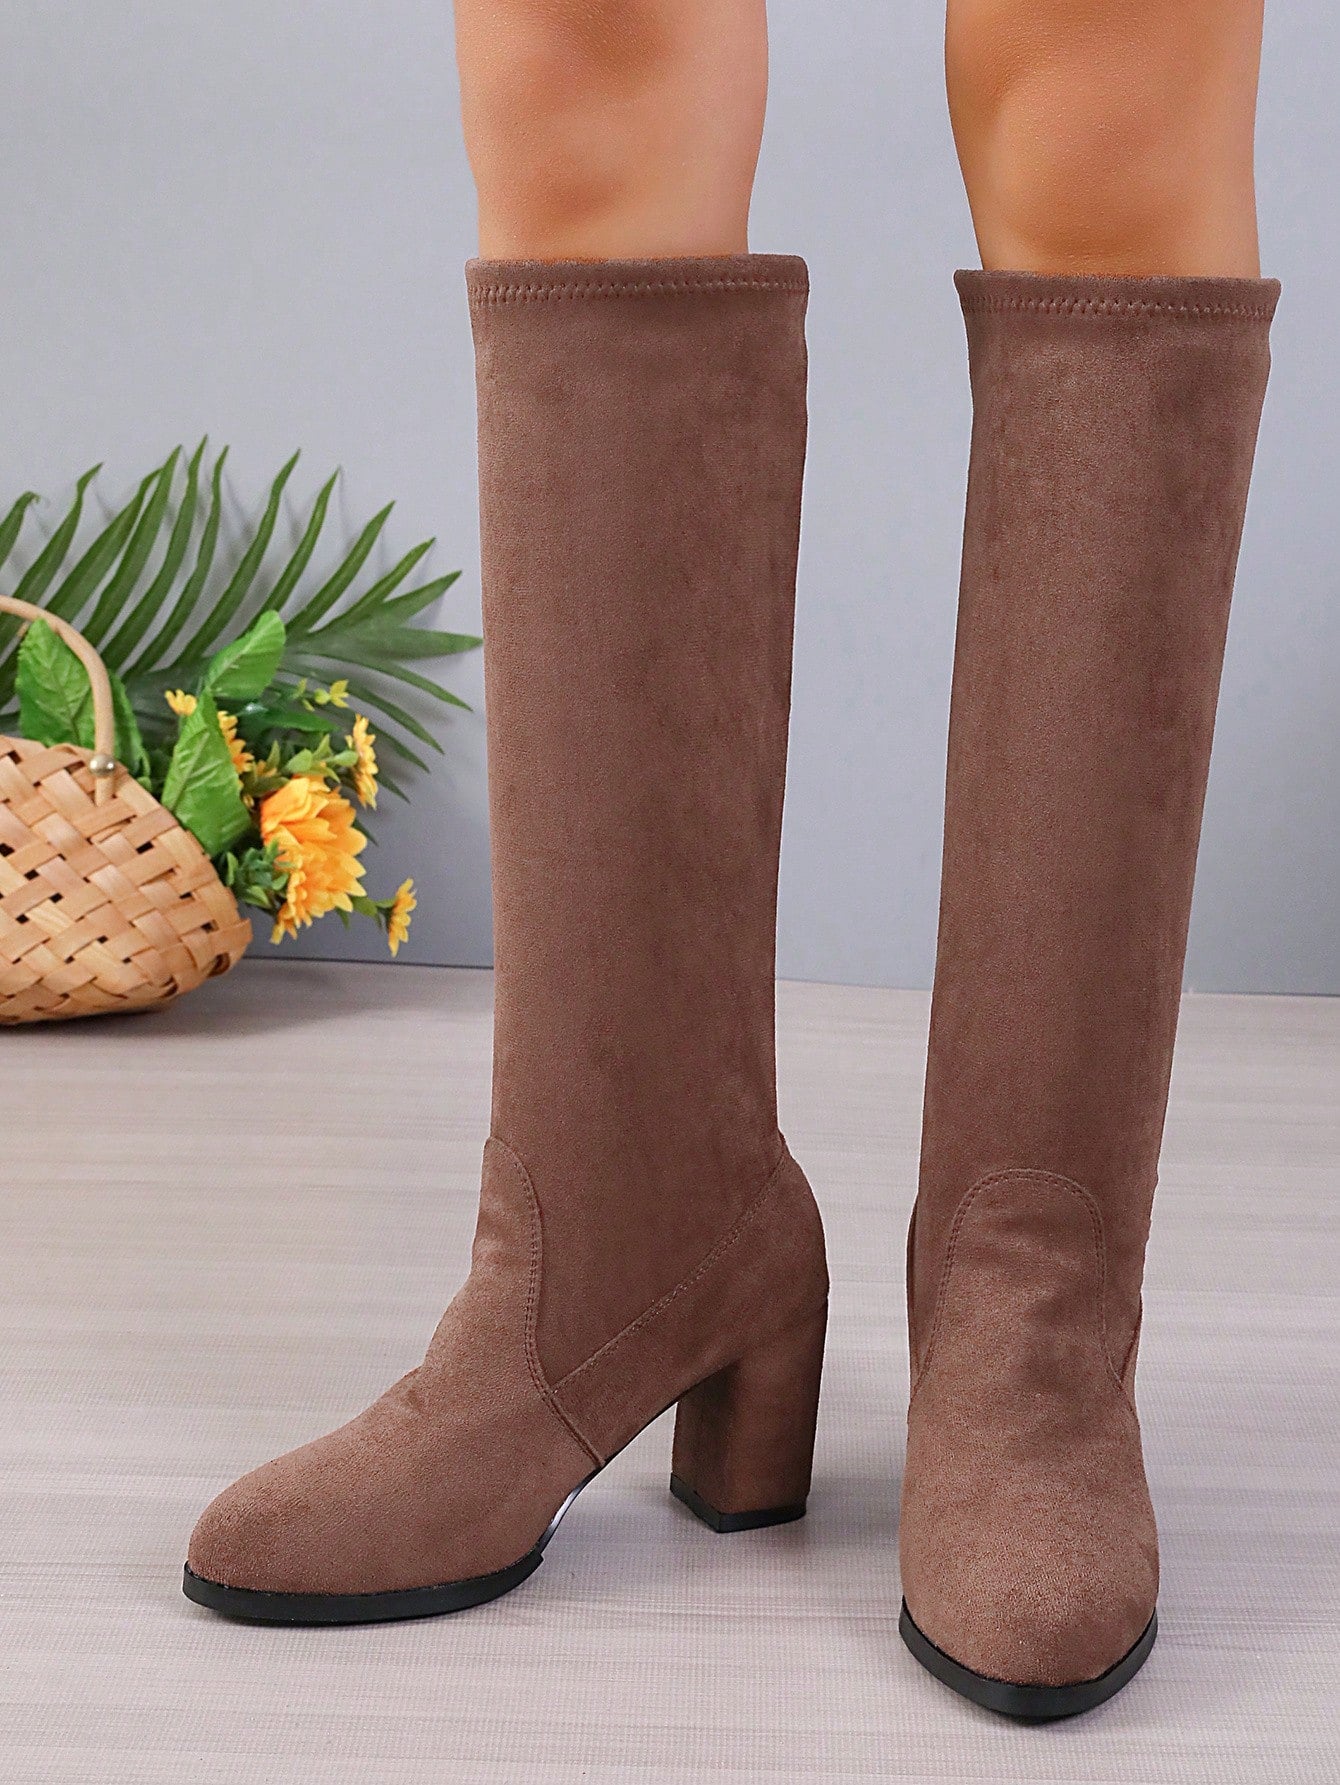 Autumn And Winter Brown Long Boots With Low Heels, Flat Soles, Elastic And Slimming Design For Students